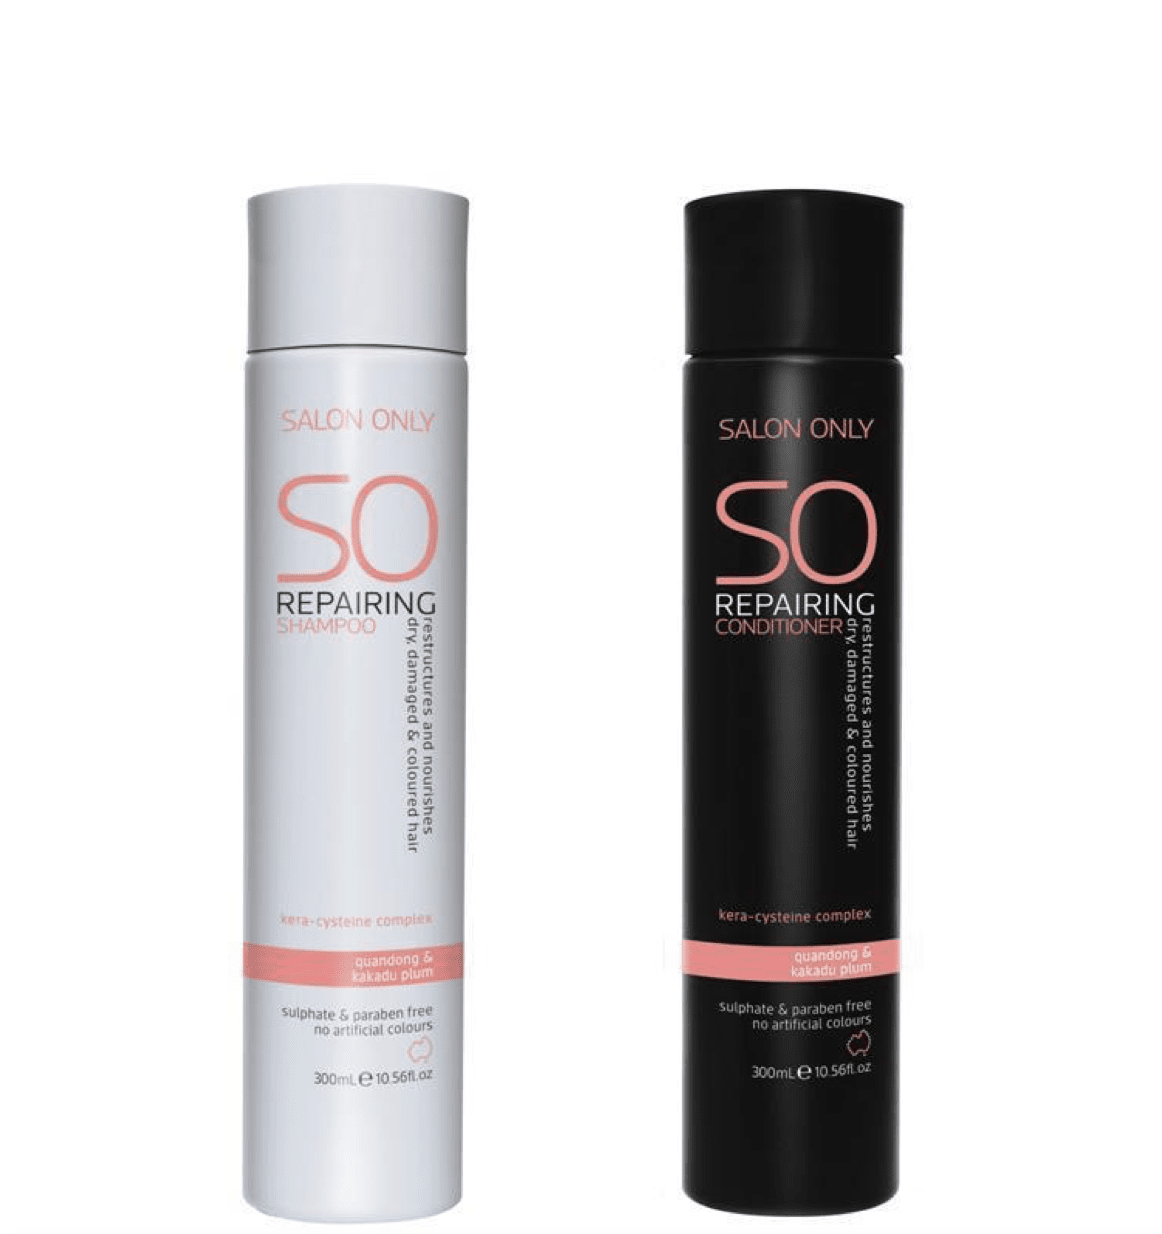 Salon Only Repairing Shampoo and Conditioner 300ml Bundle